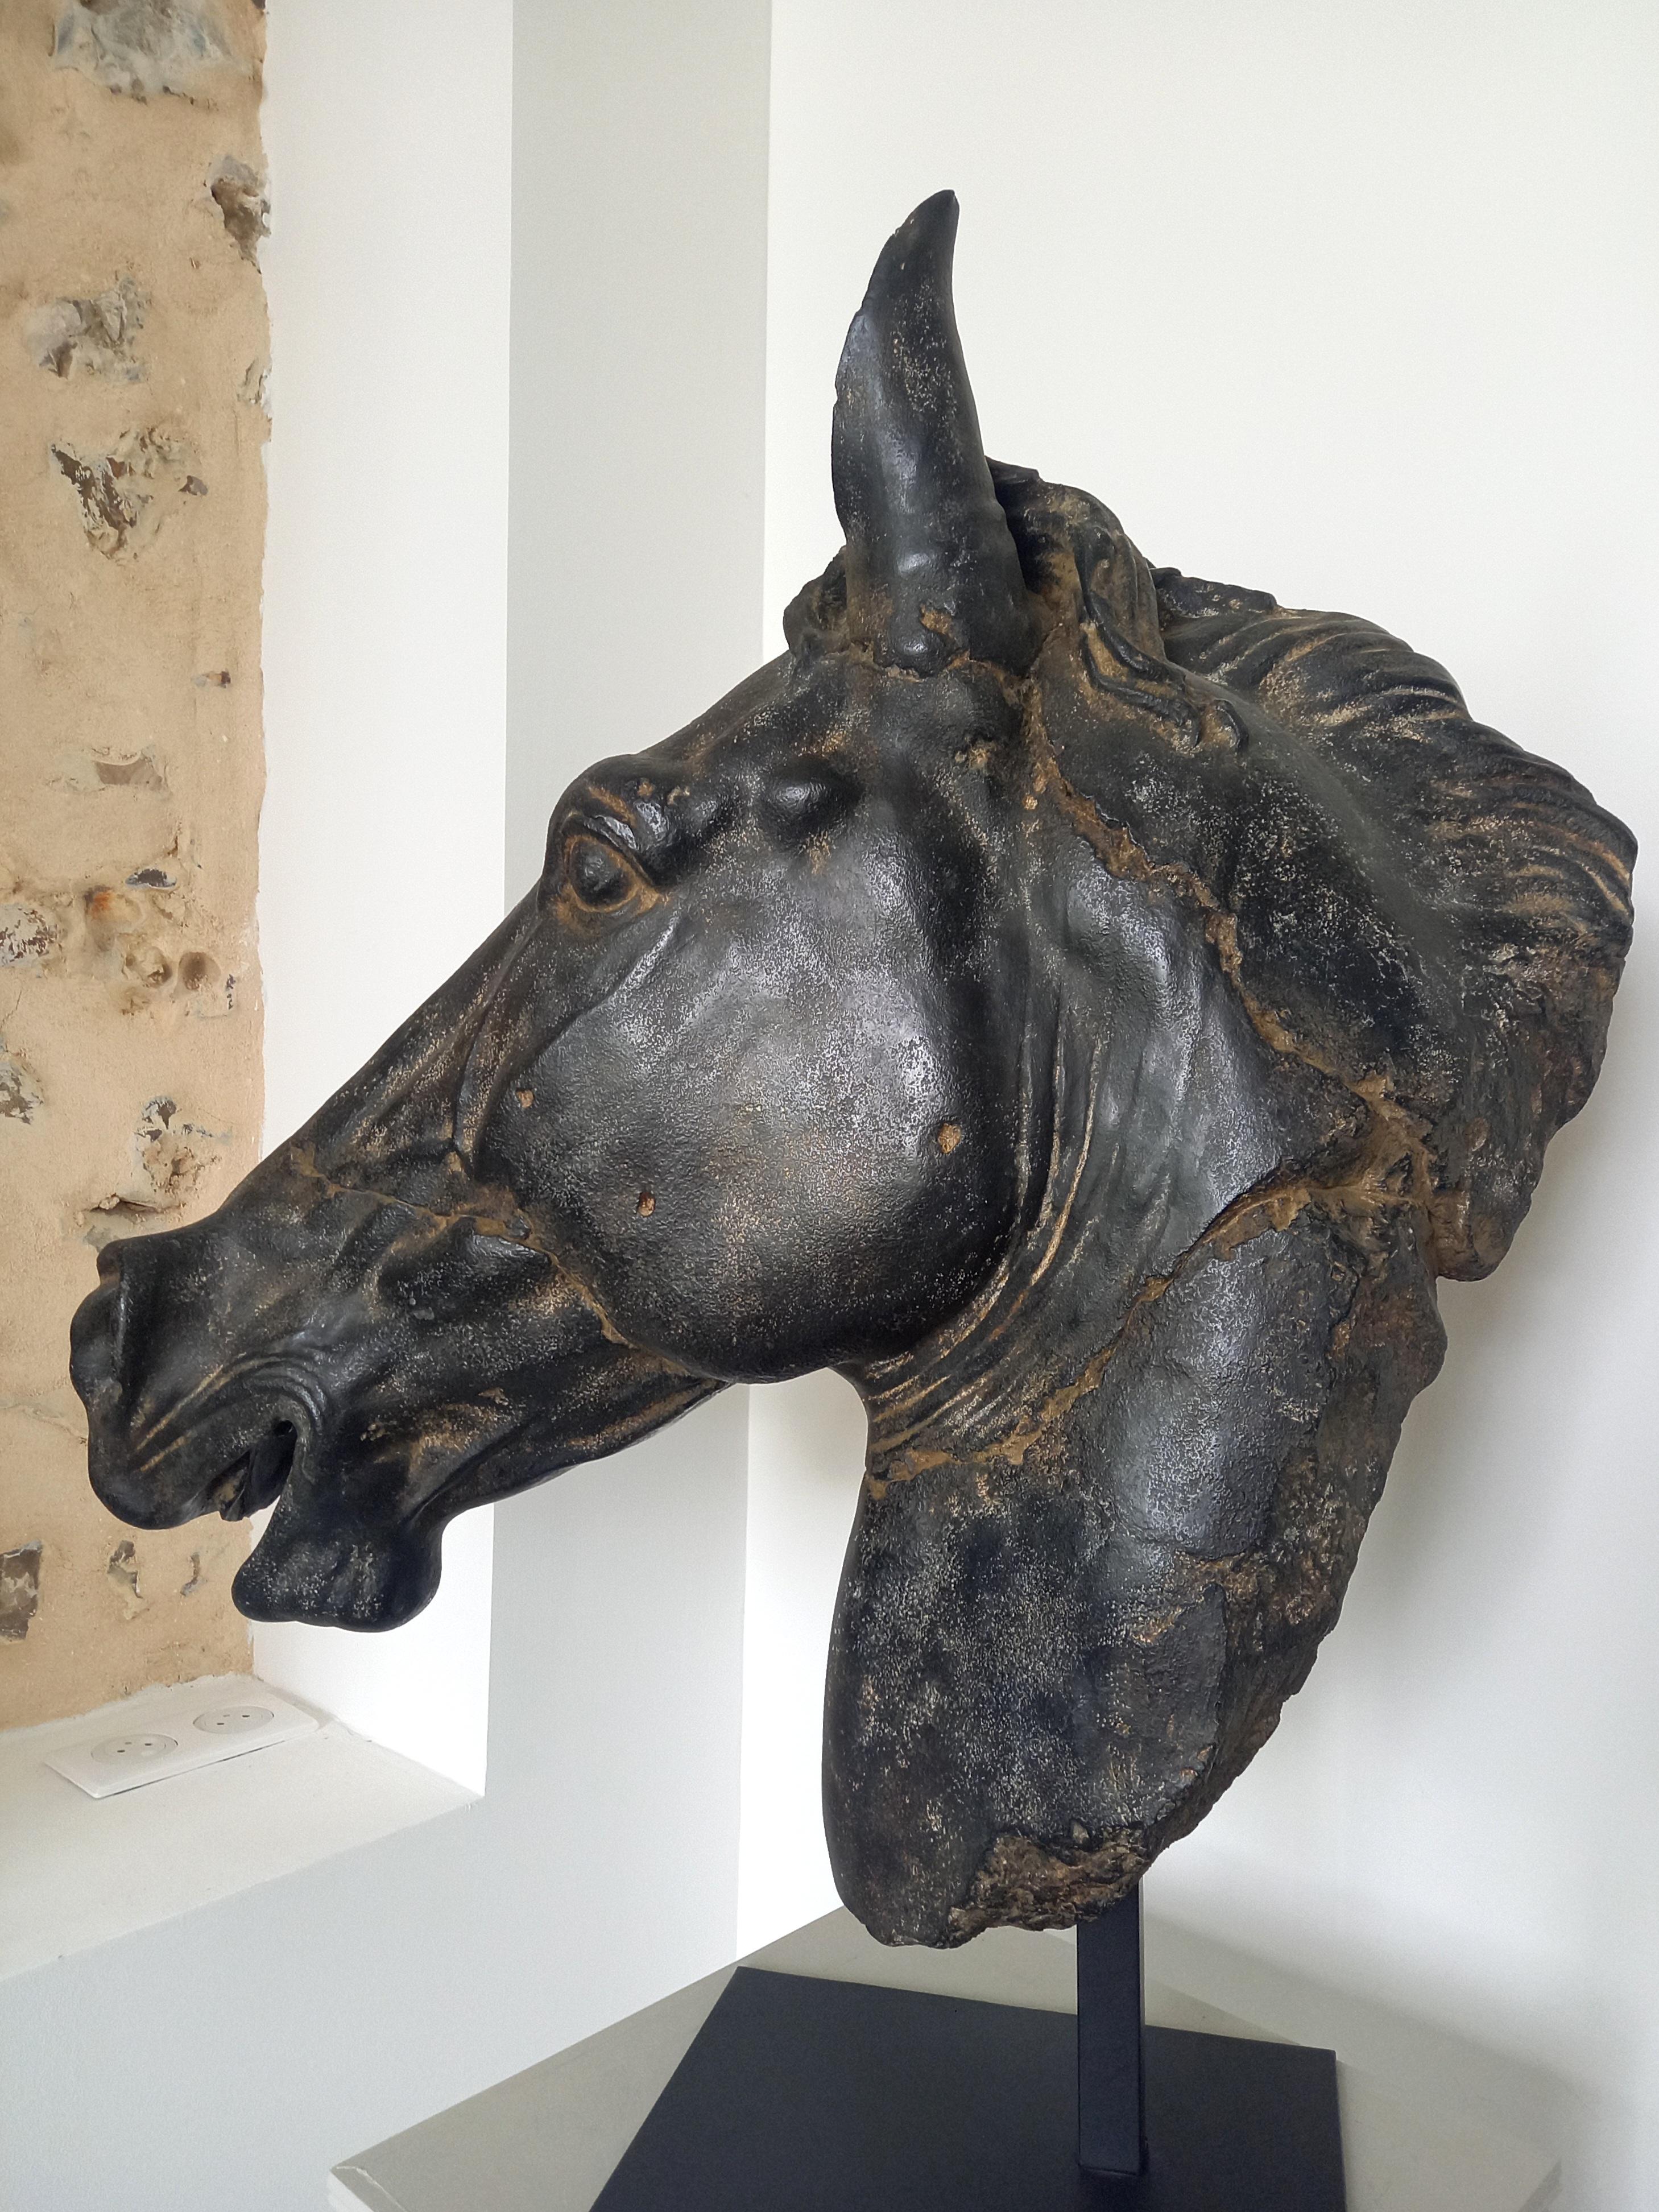 Remarkable reproduction of a historic bronze sculpture, this one is made of marble powder and resin, solid and light.
The patina is extraordinary ans very representative of an antique black stone.
It was made in a French workshop and patinated by